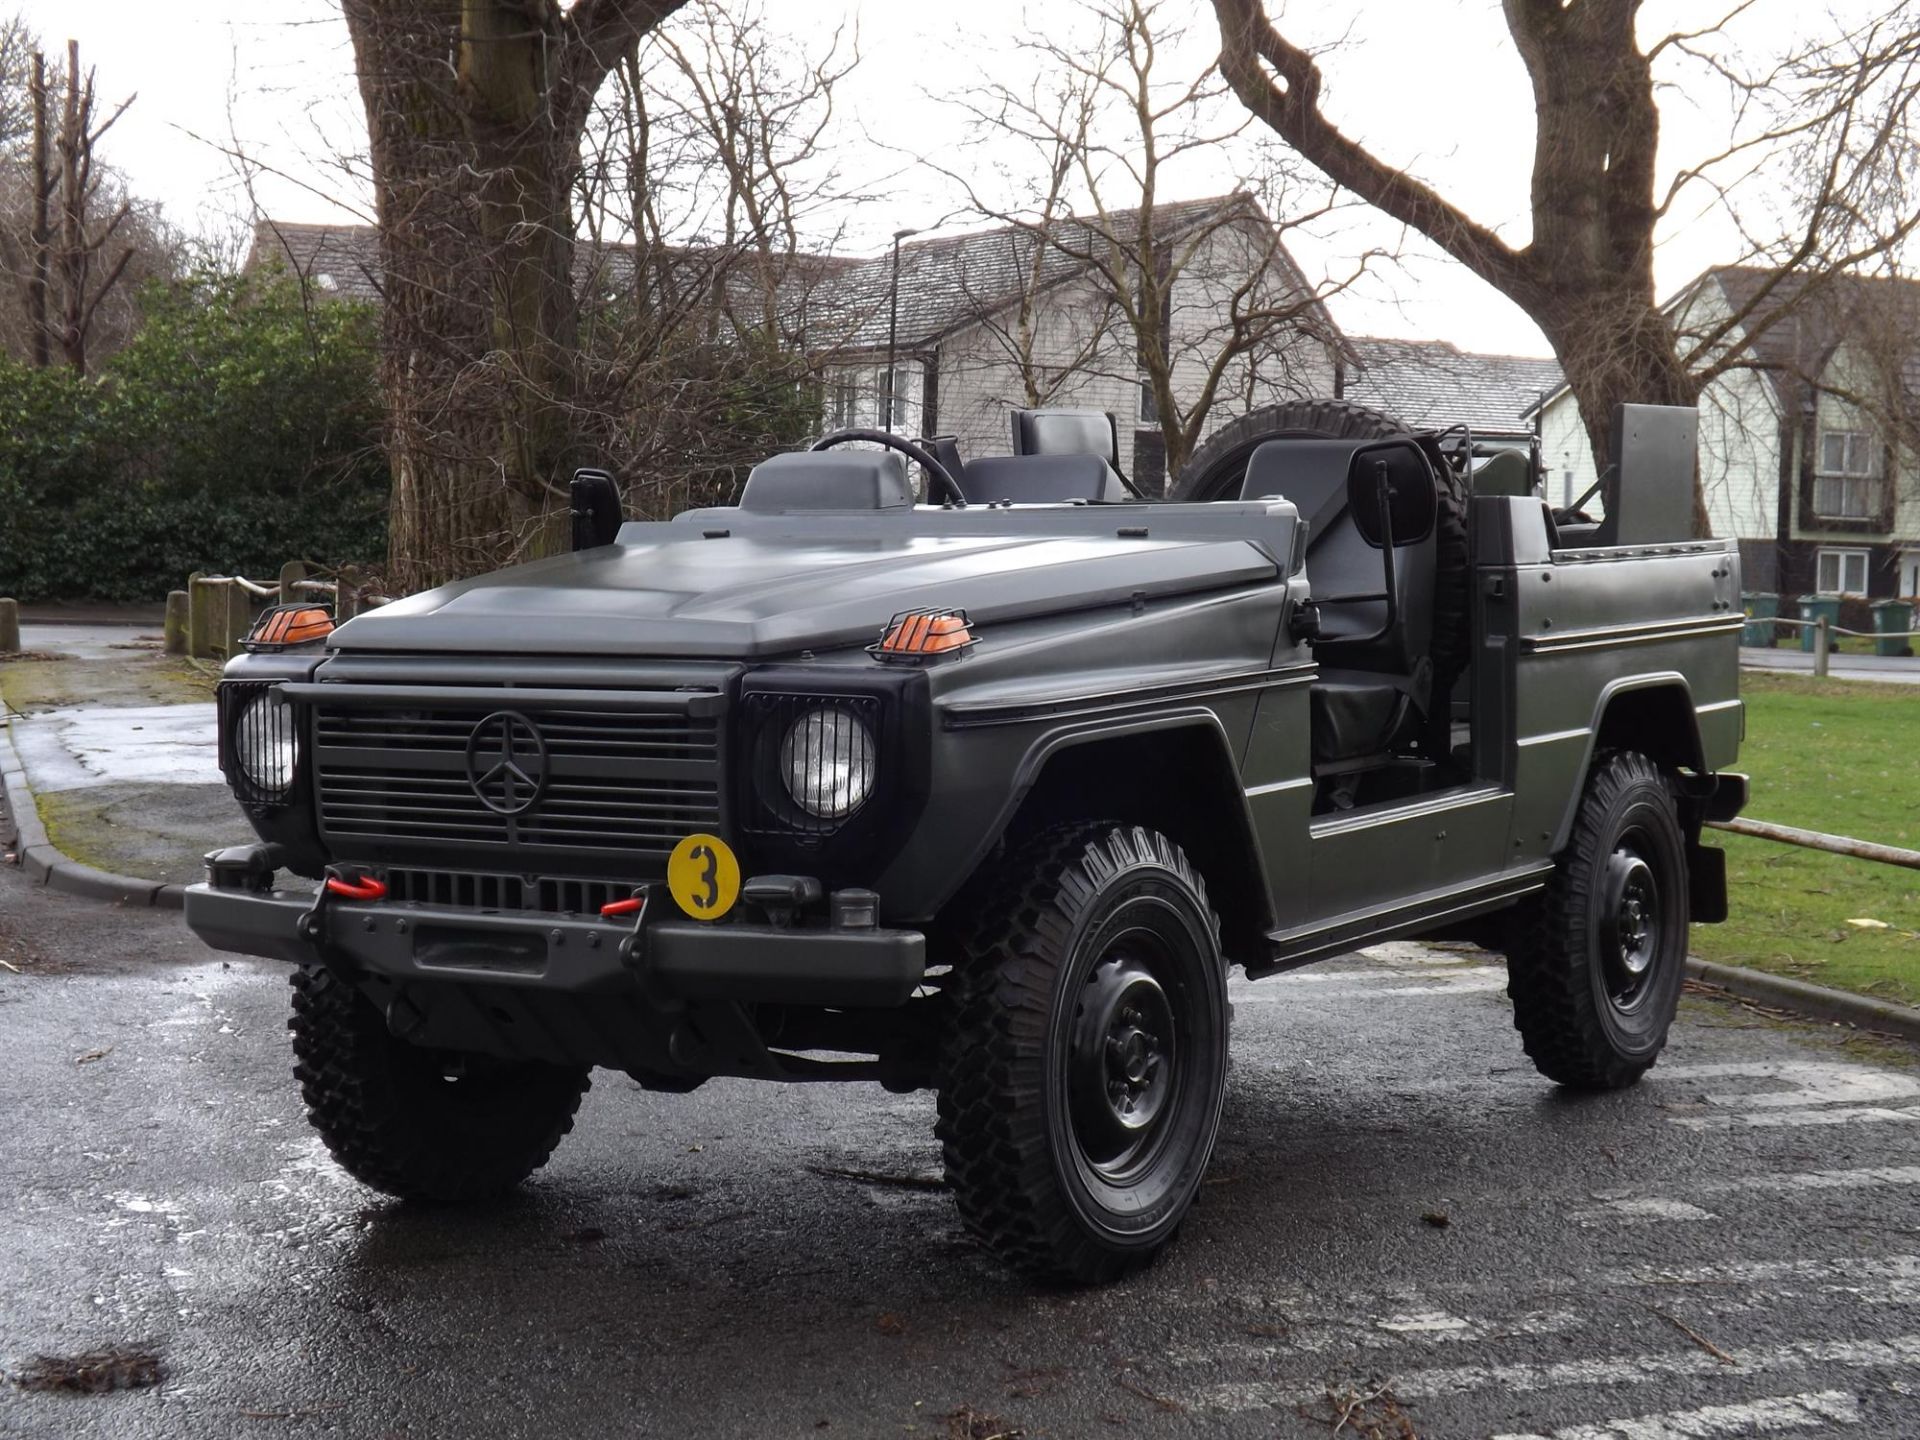 1987 Mercedes-Benz G-240 'Jeep' - Image 10 of 10